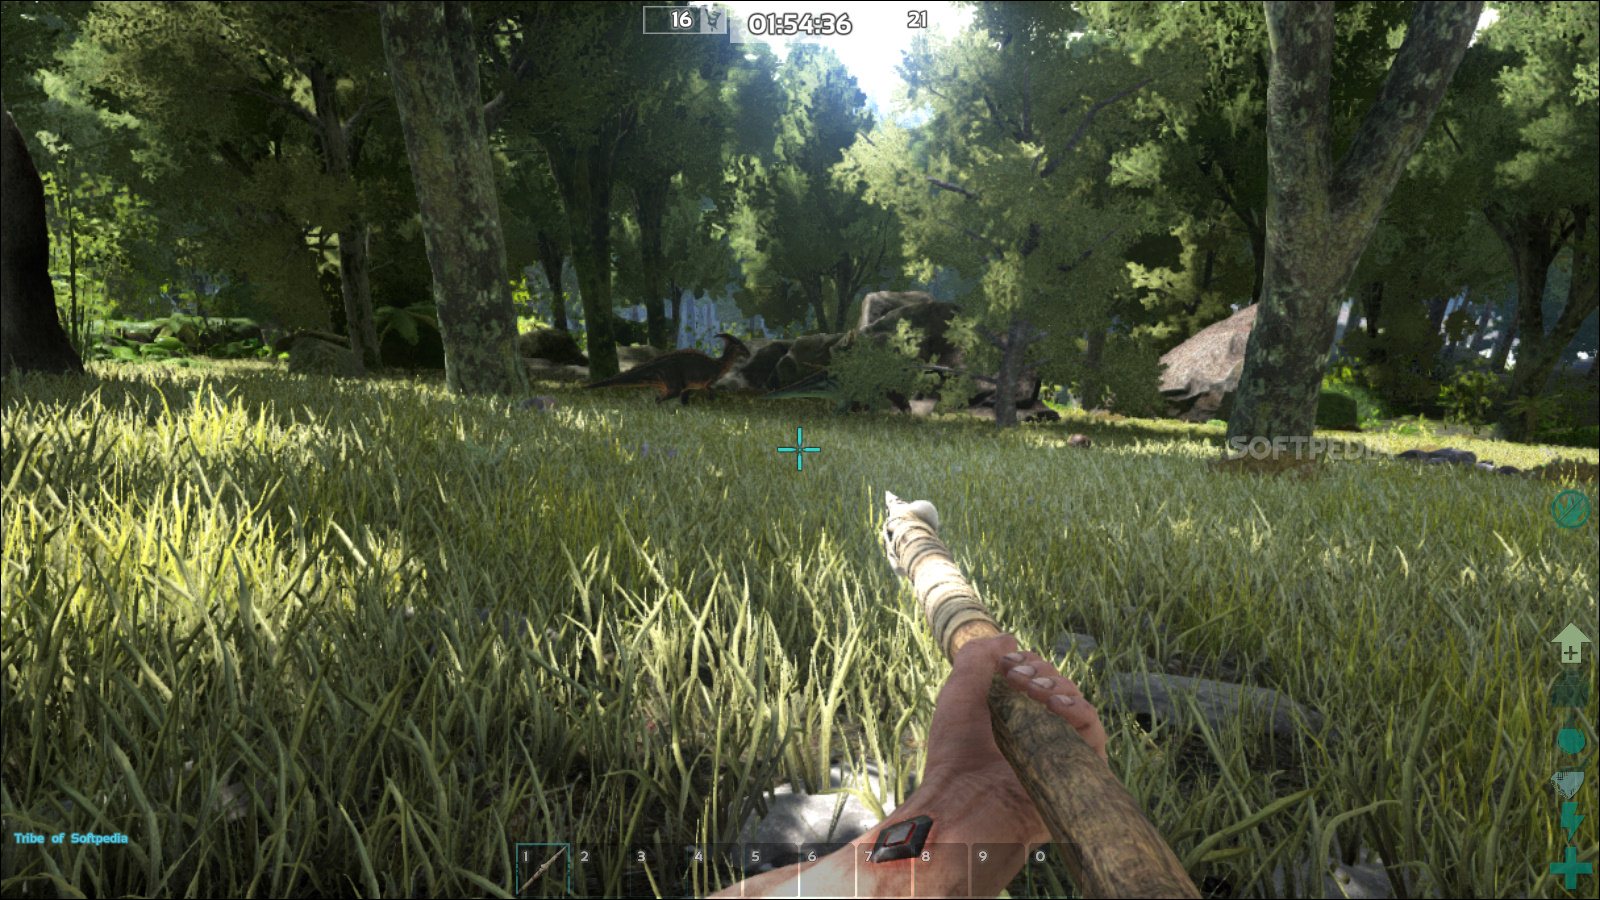 download ark survival of the fittest for free